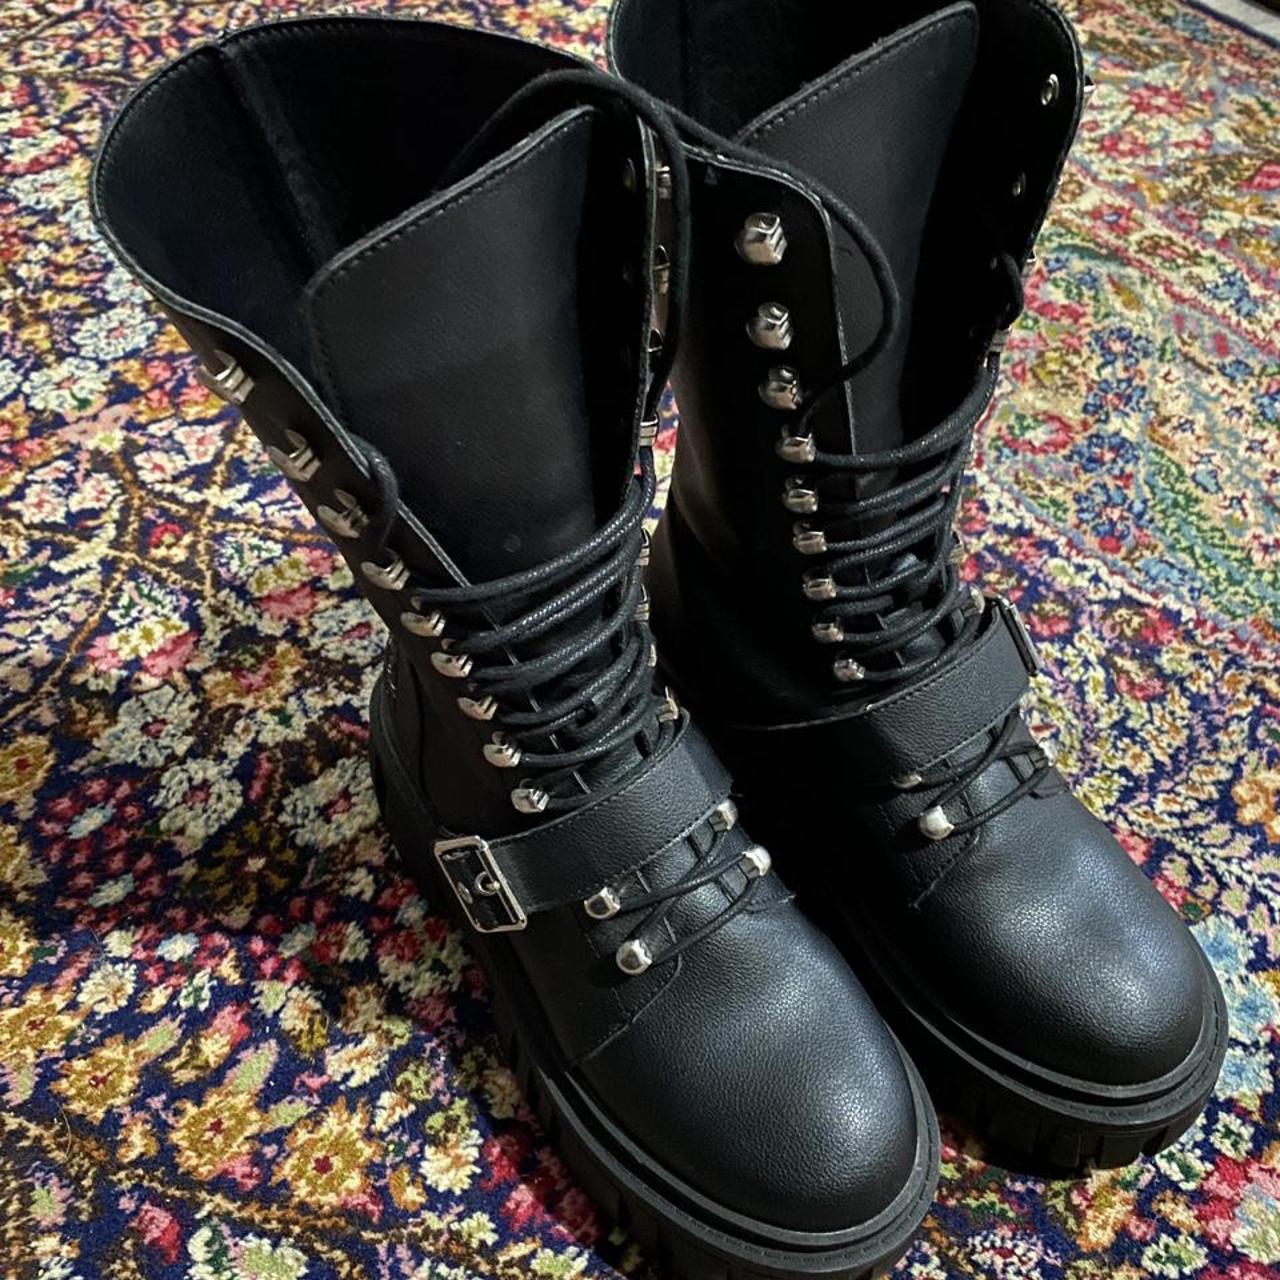 Product Image 2 - 📡 Sonic Boots 📡
Excellent condition-